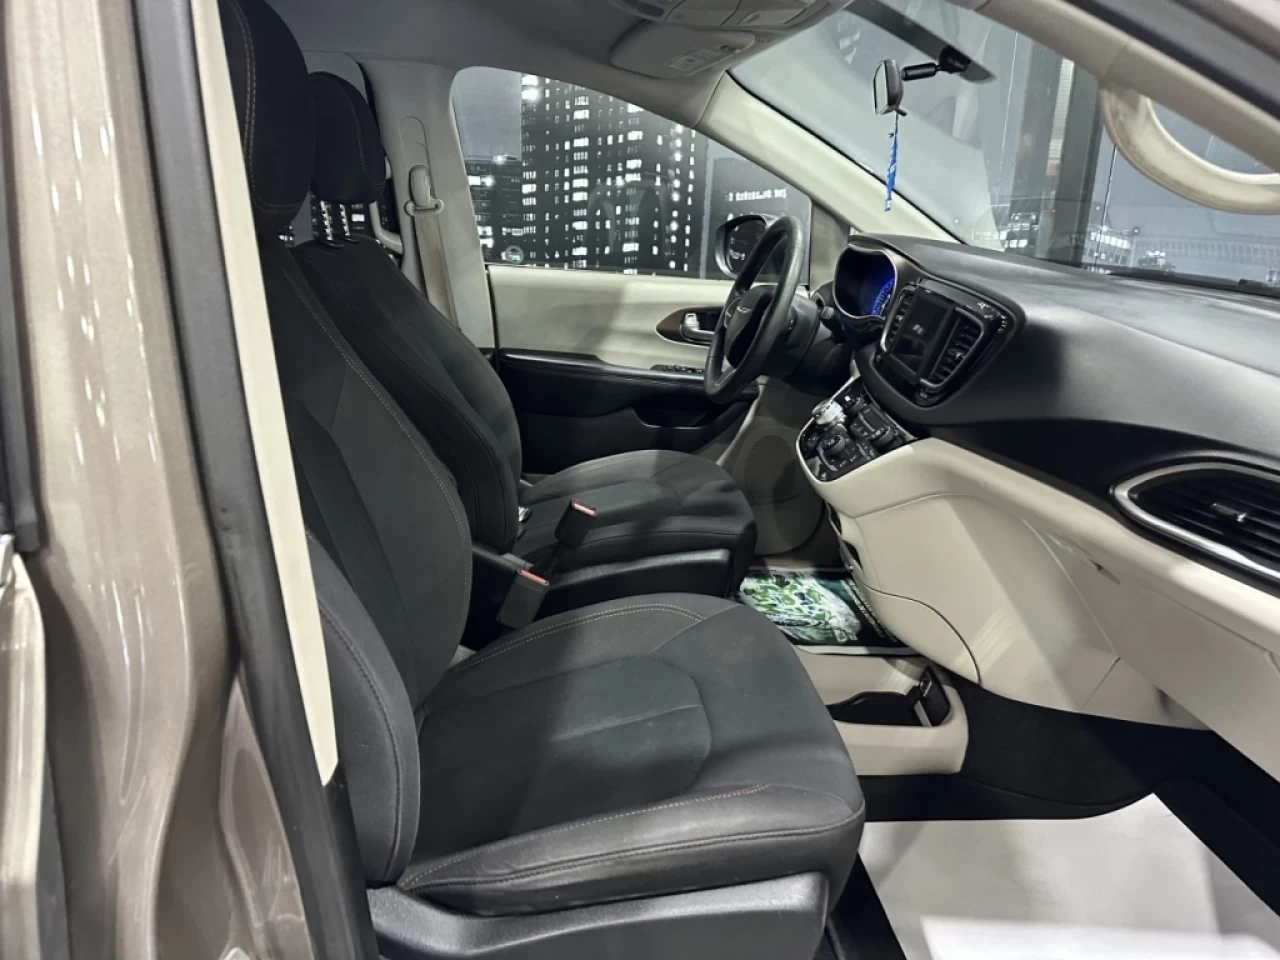 2018 Chrysler Pacifica LX 7 PASSAGERS SEULEMENT 124 500KM Image principale